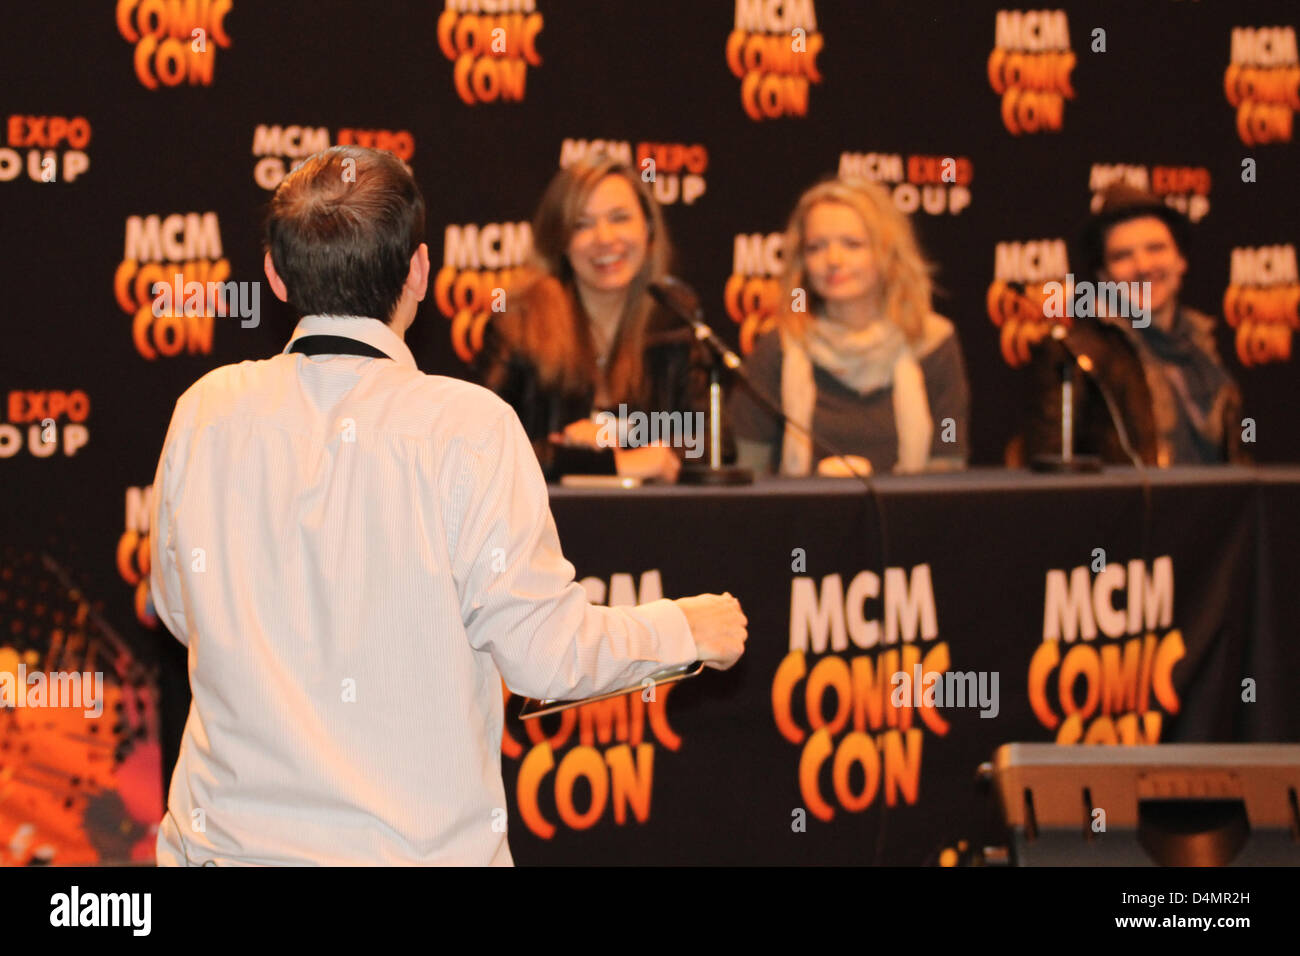 Birmingham, UK. 16th March 2013. Lucy Brown, Hannah Spearitt and Andrew Lee Potts (left to right) stars of Primeval, take questions at Birmingham MCM Expo Stock Photo